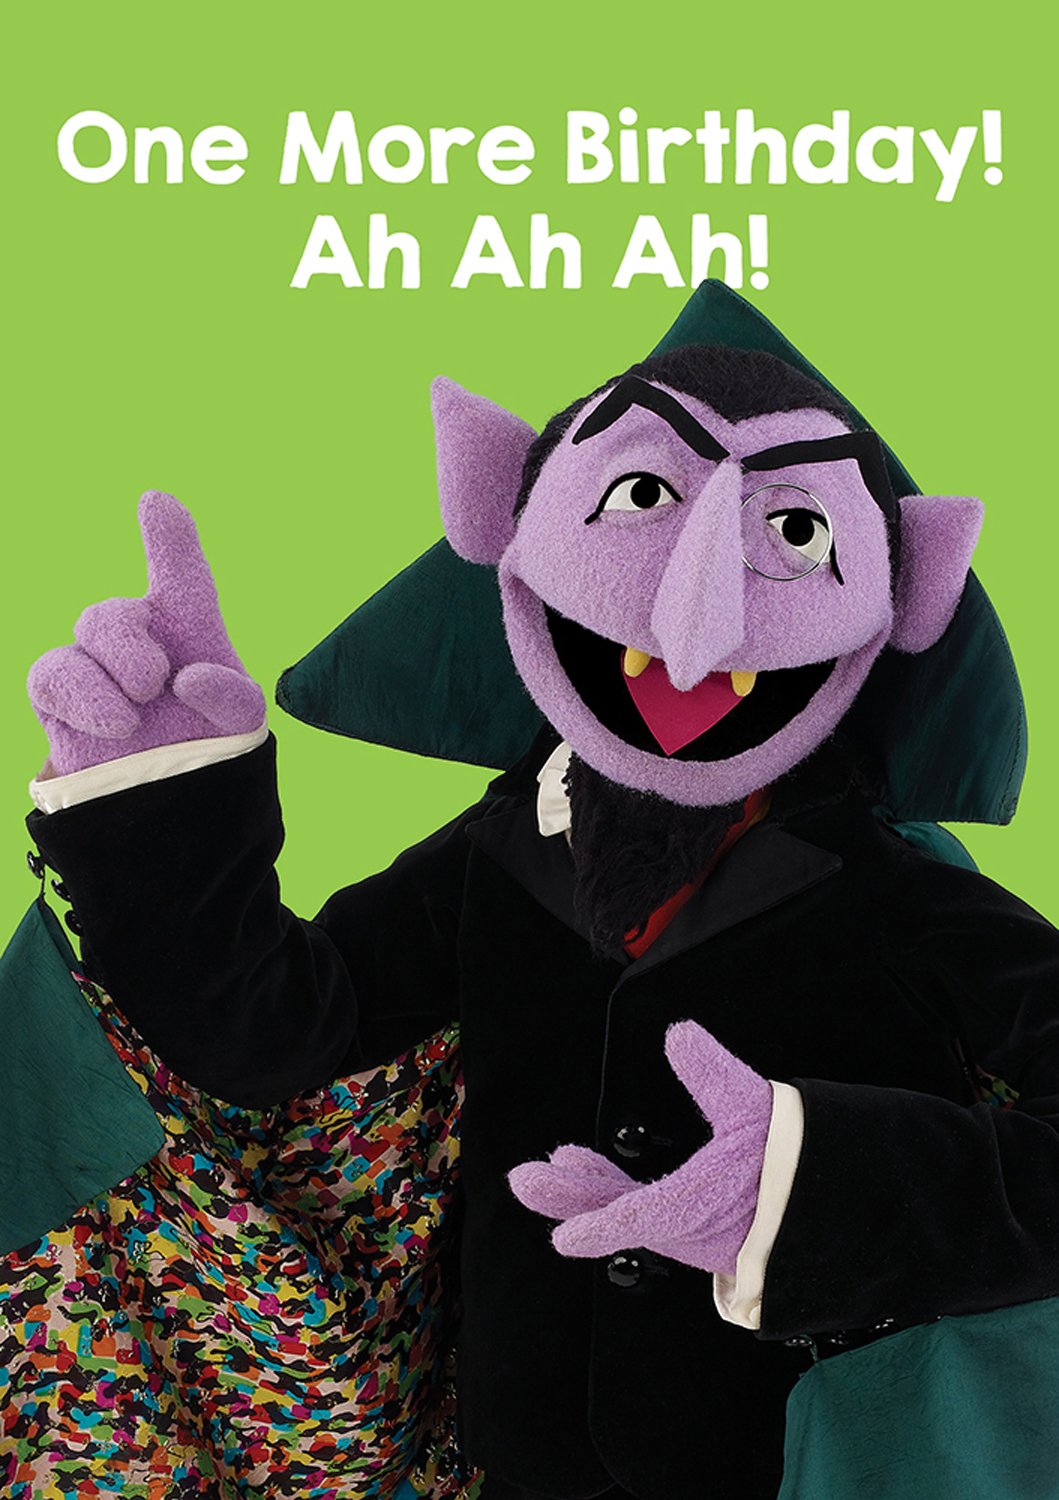 Sesame Street The Count Birthday Greetings Card.